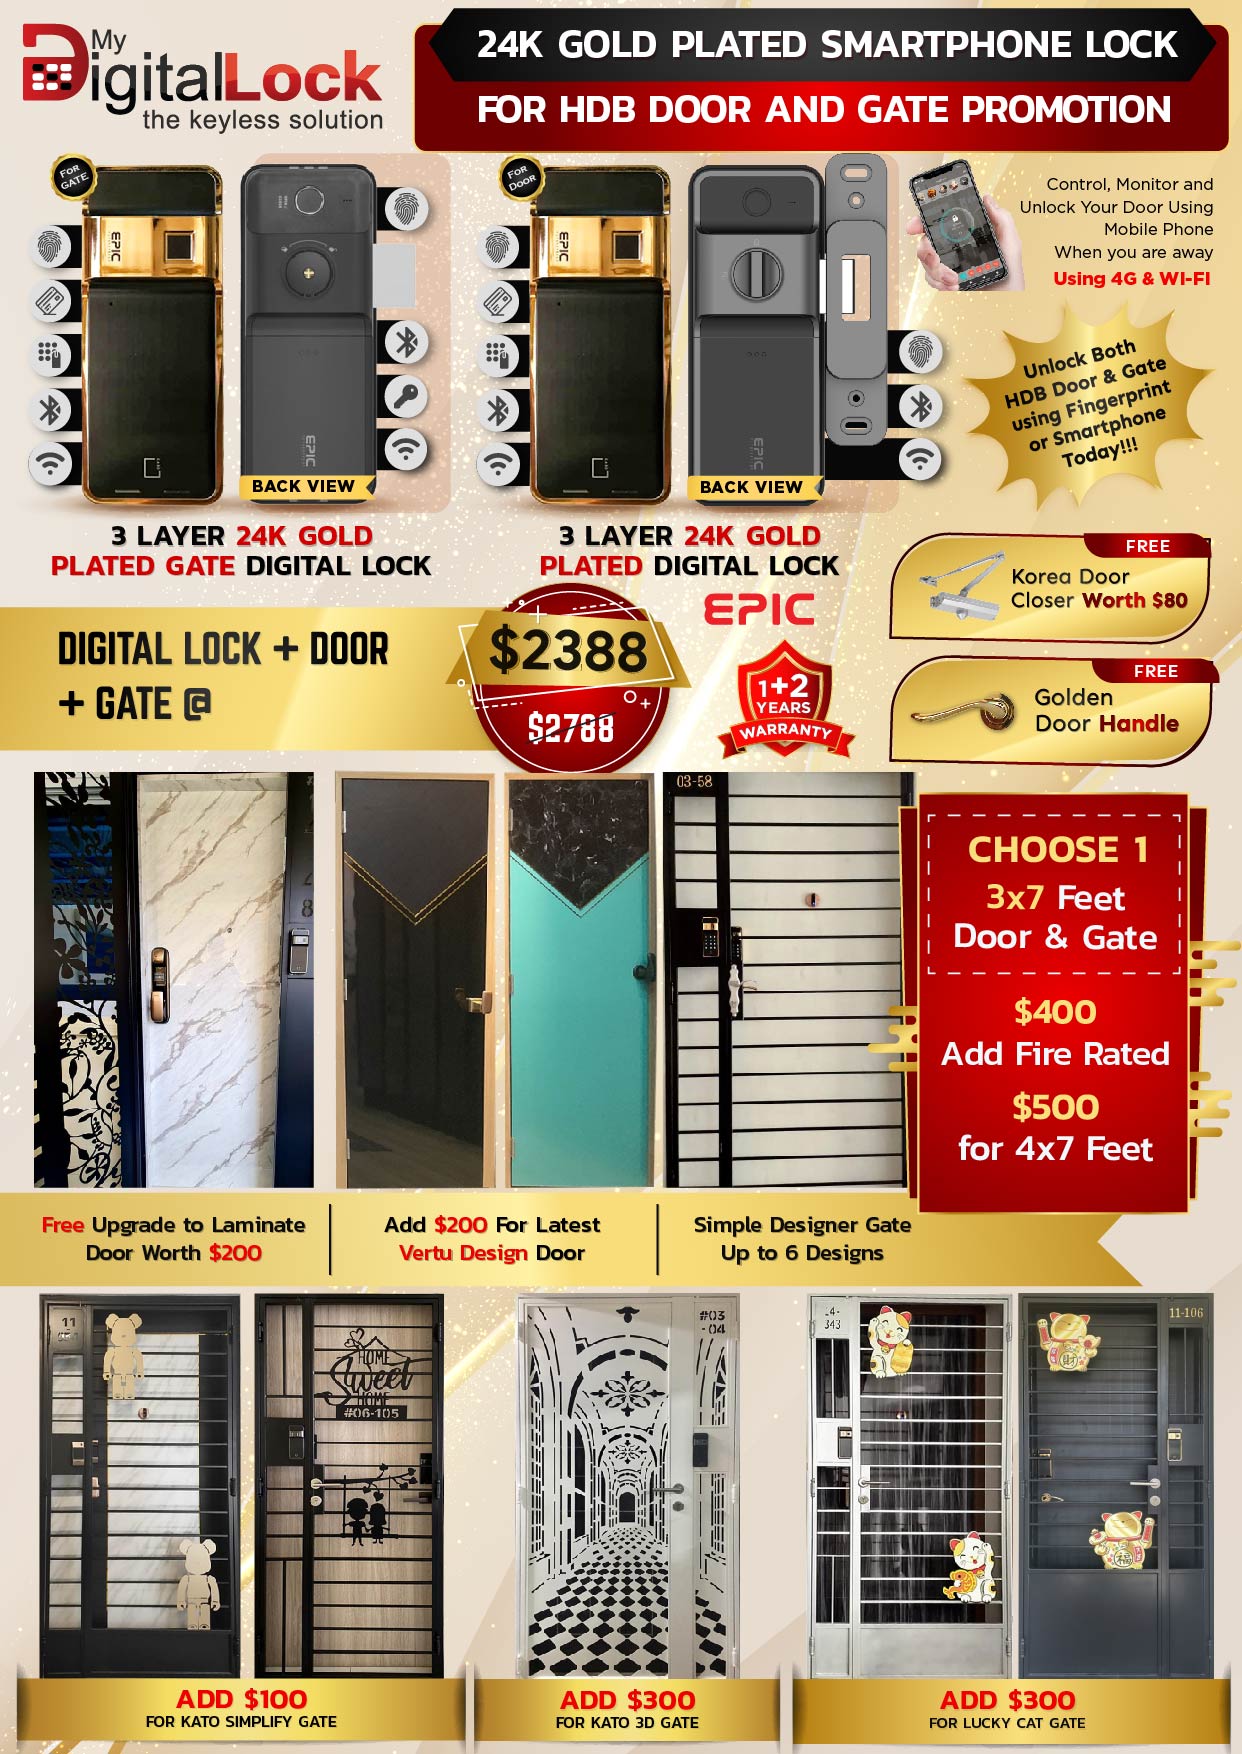 24K Gold Platted Smartphone Lock for HDB Door and Gate Promotion 2022